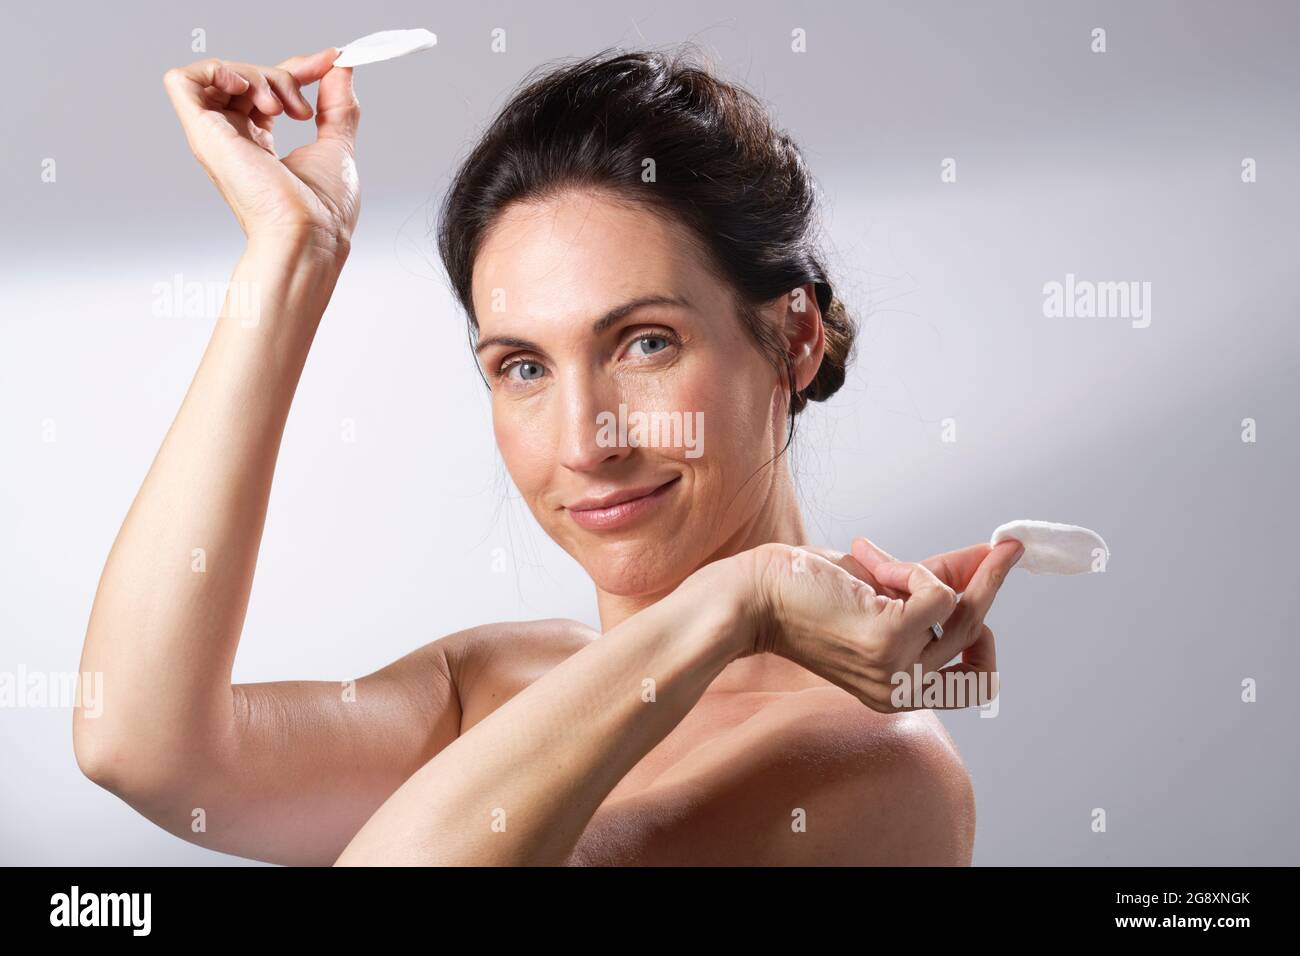 a woman having fun with a pair of cotton pads Stock Photo